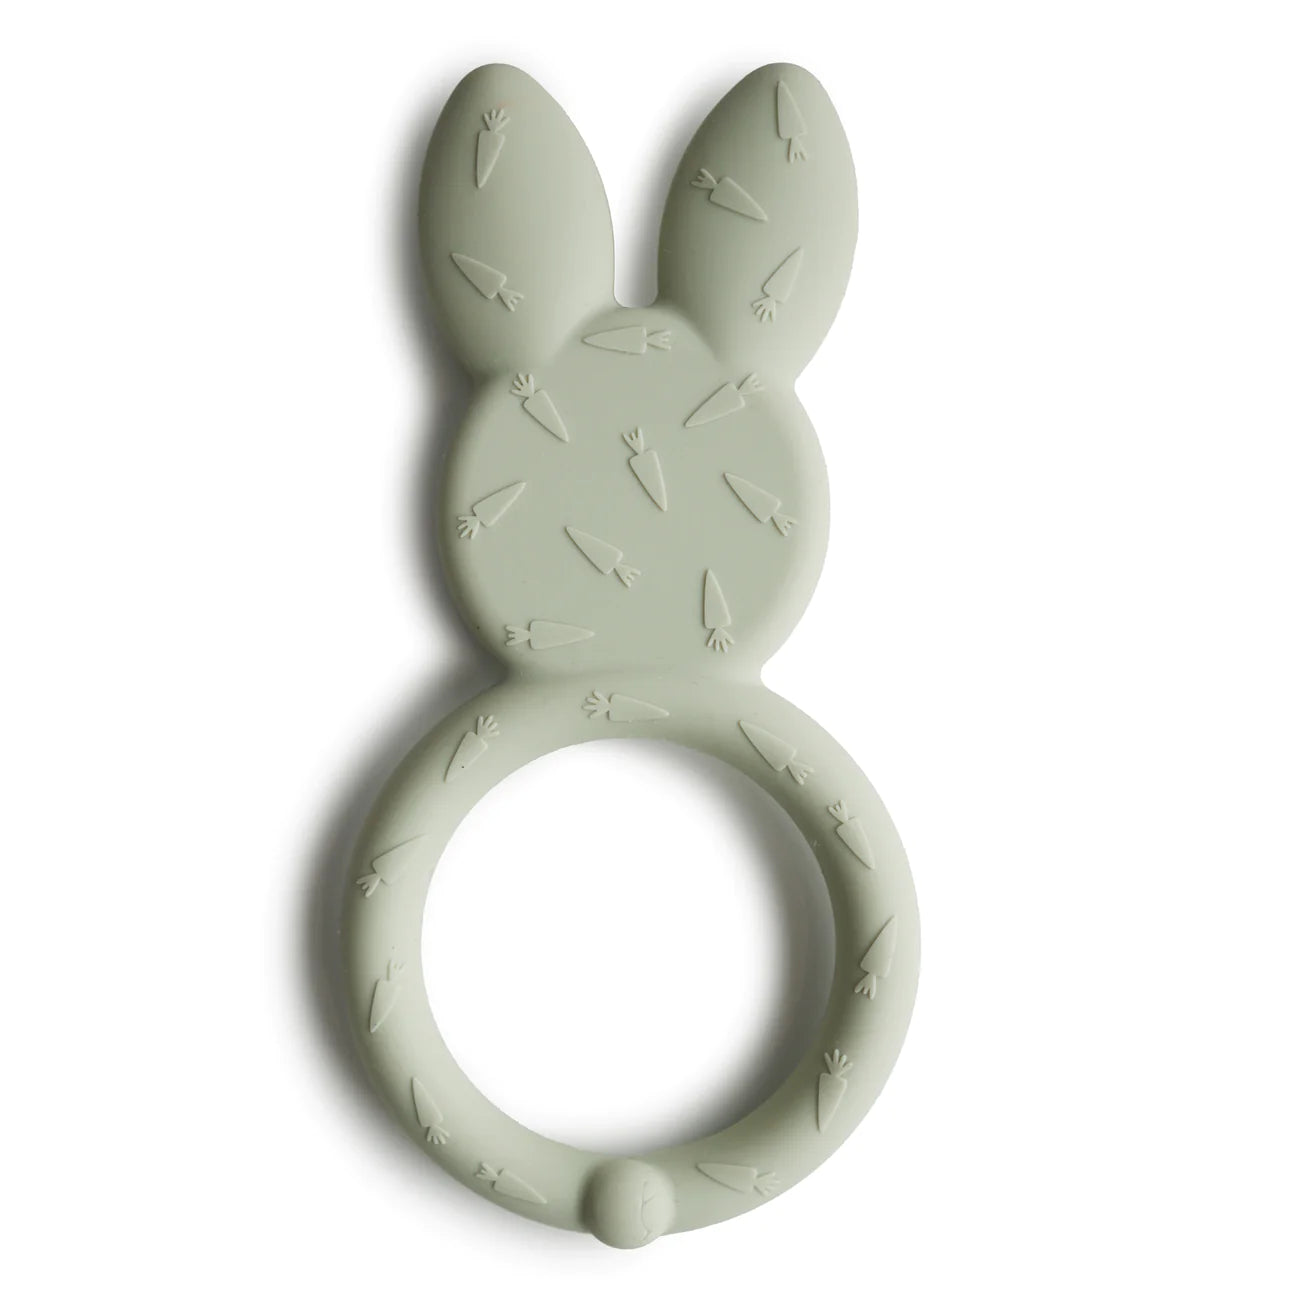 Bunny Teether | Food-Grade Silicone | Safe Teething Toy